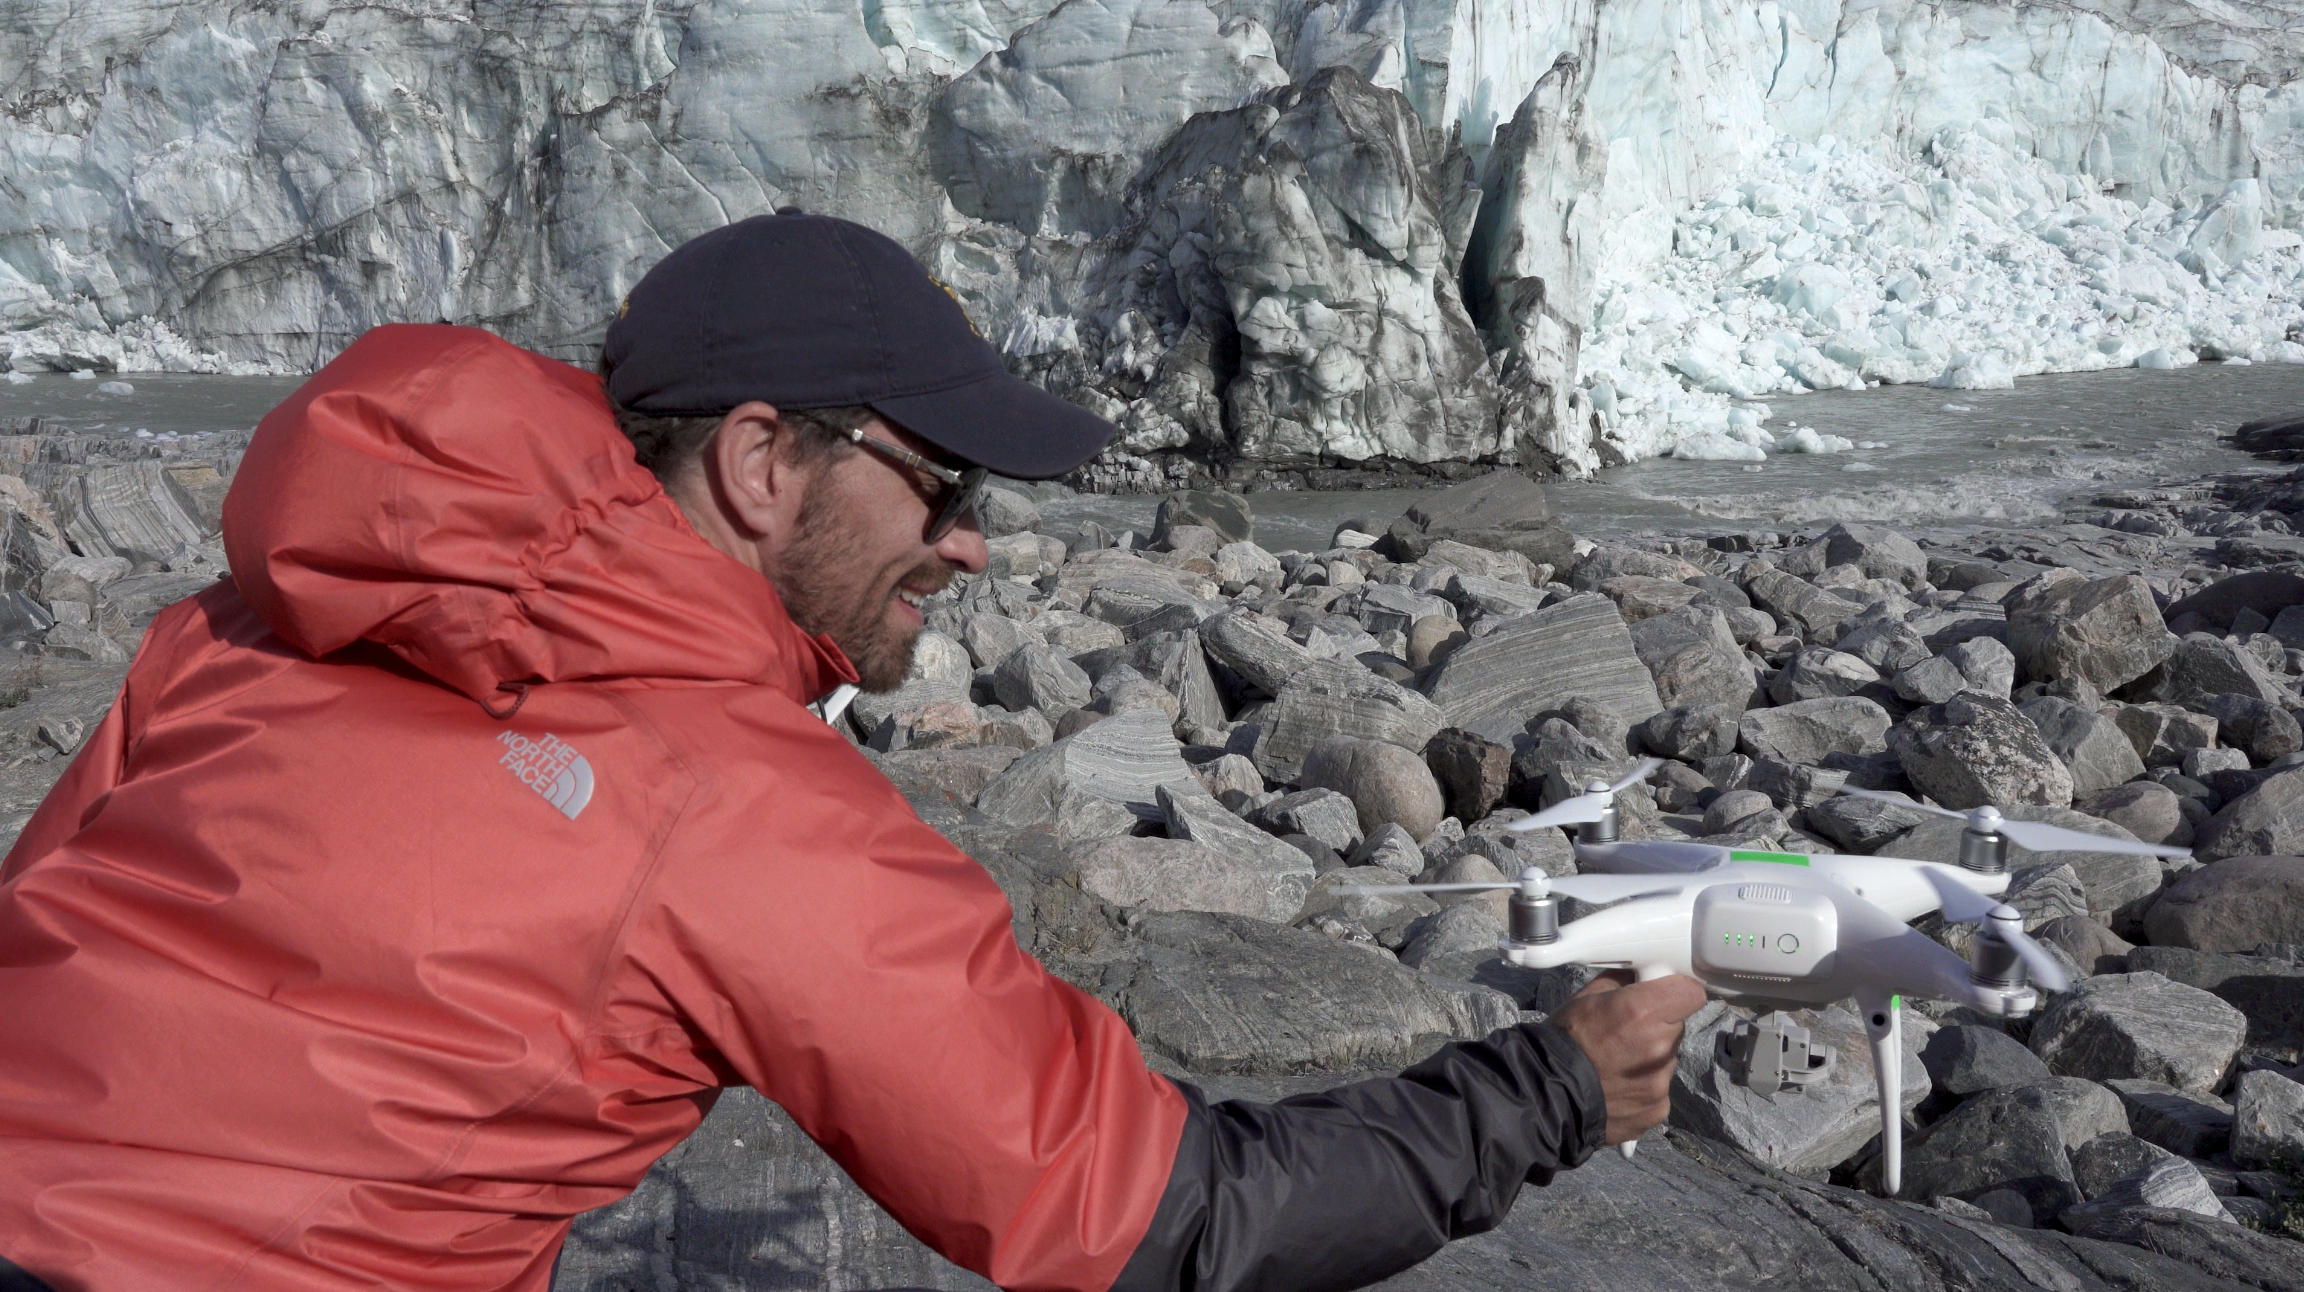 Man holding drone on rocky surface in Greenland